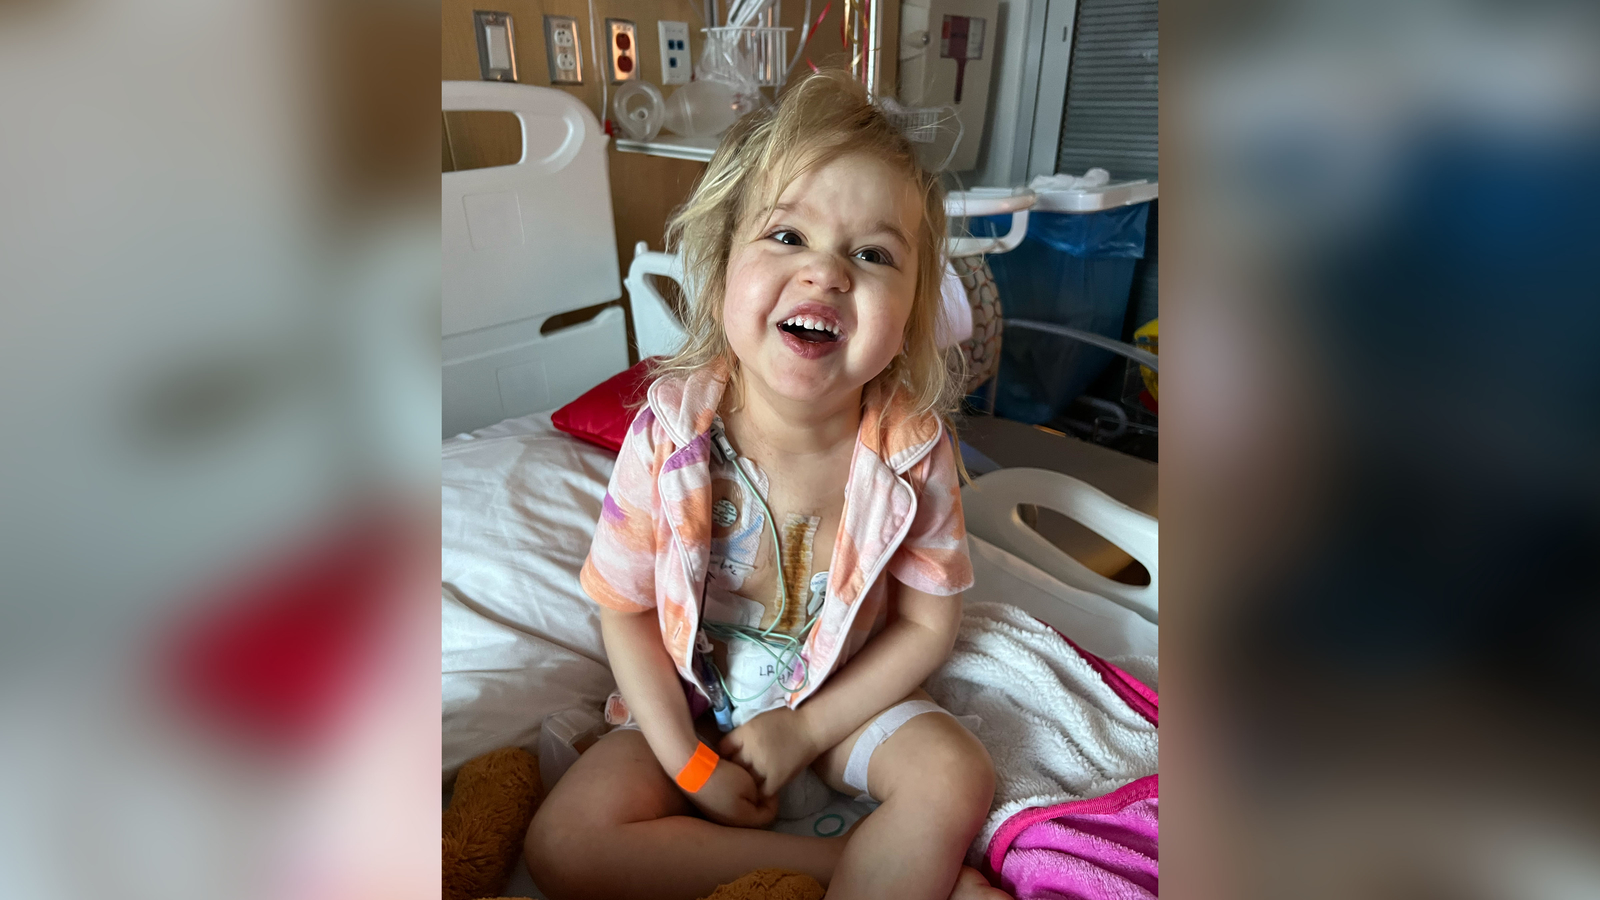 4-year-old who received new heart after waiting 1,025 days goes home from Texas Children’s Hospital in Houston [Video]